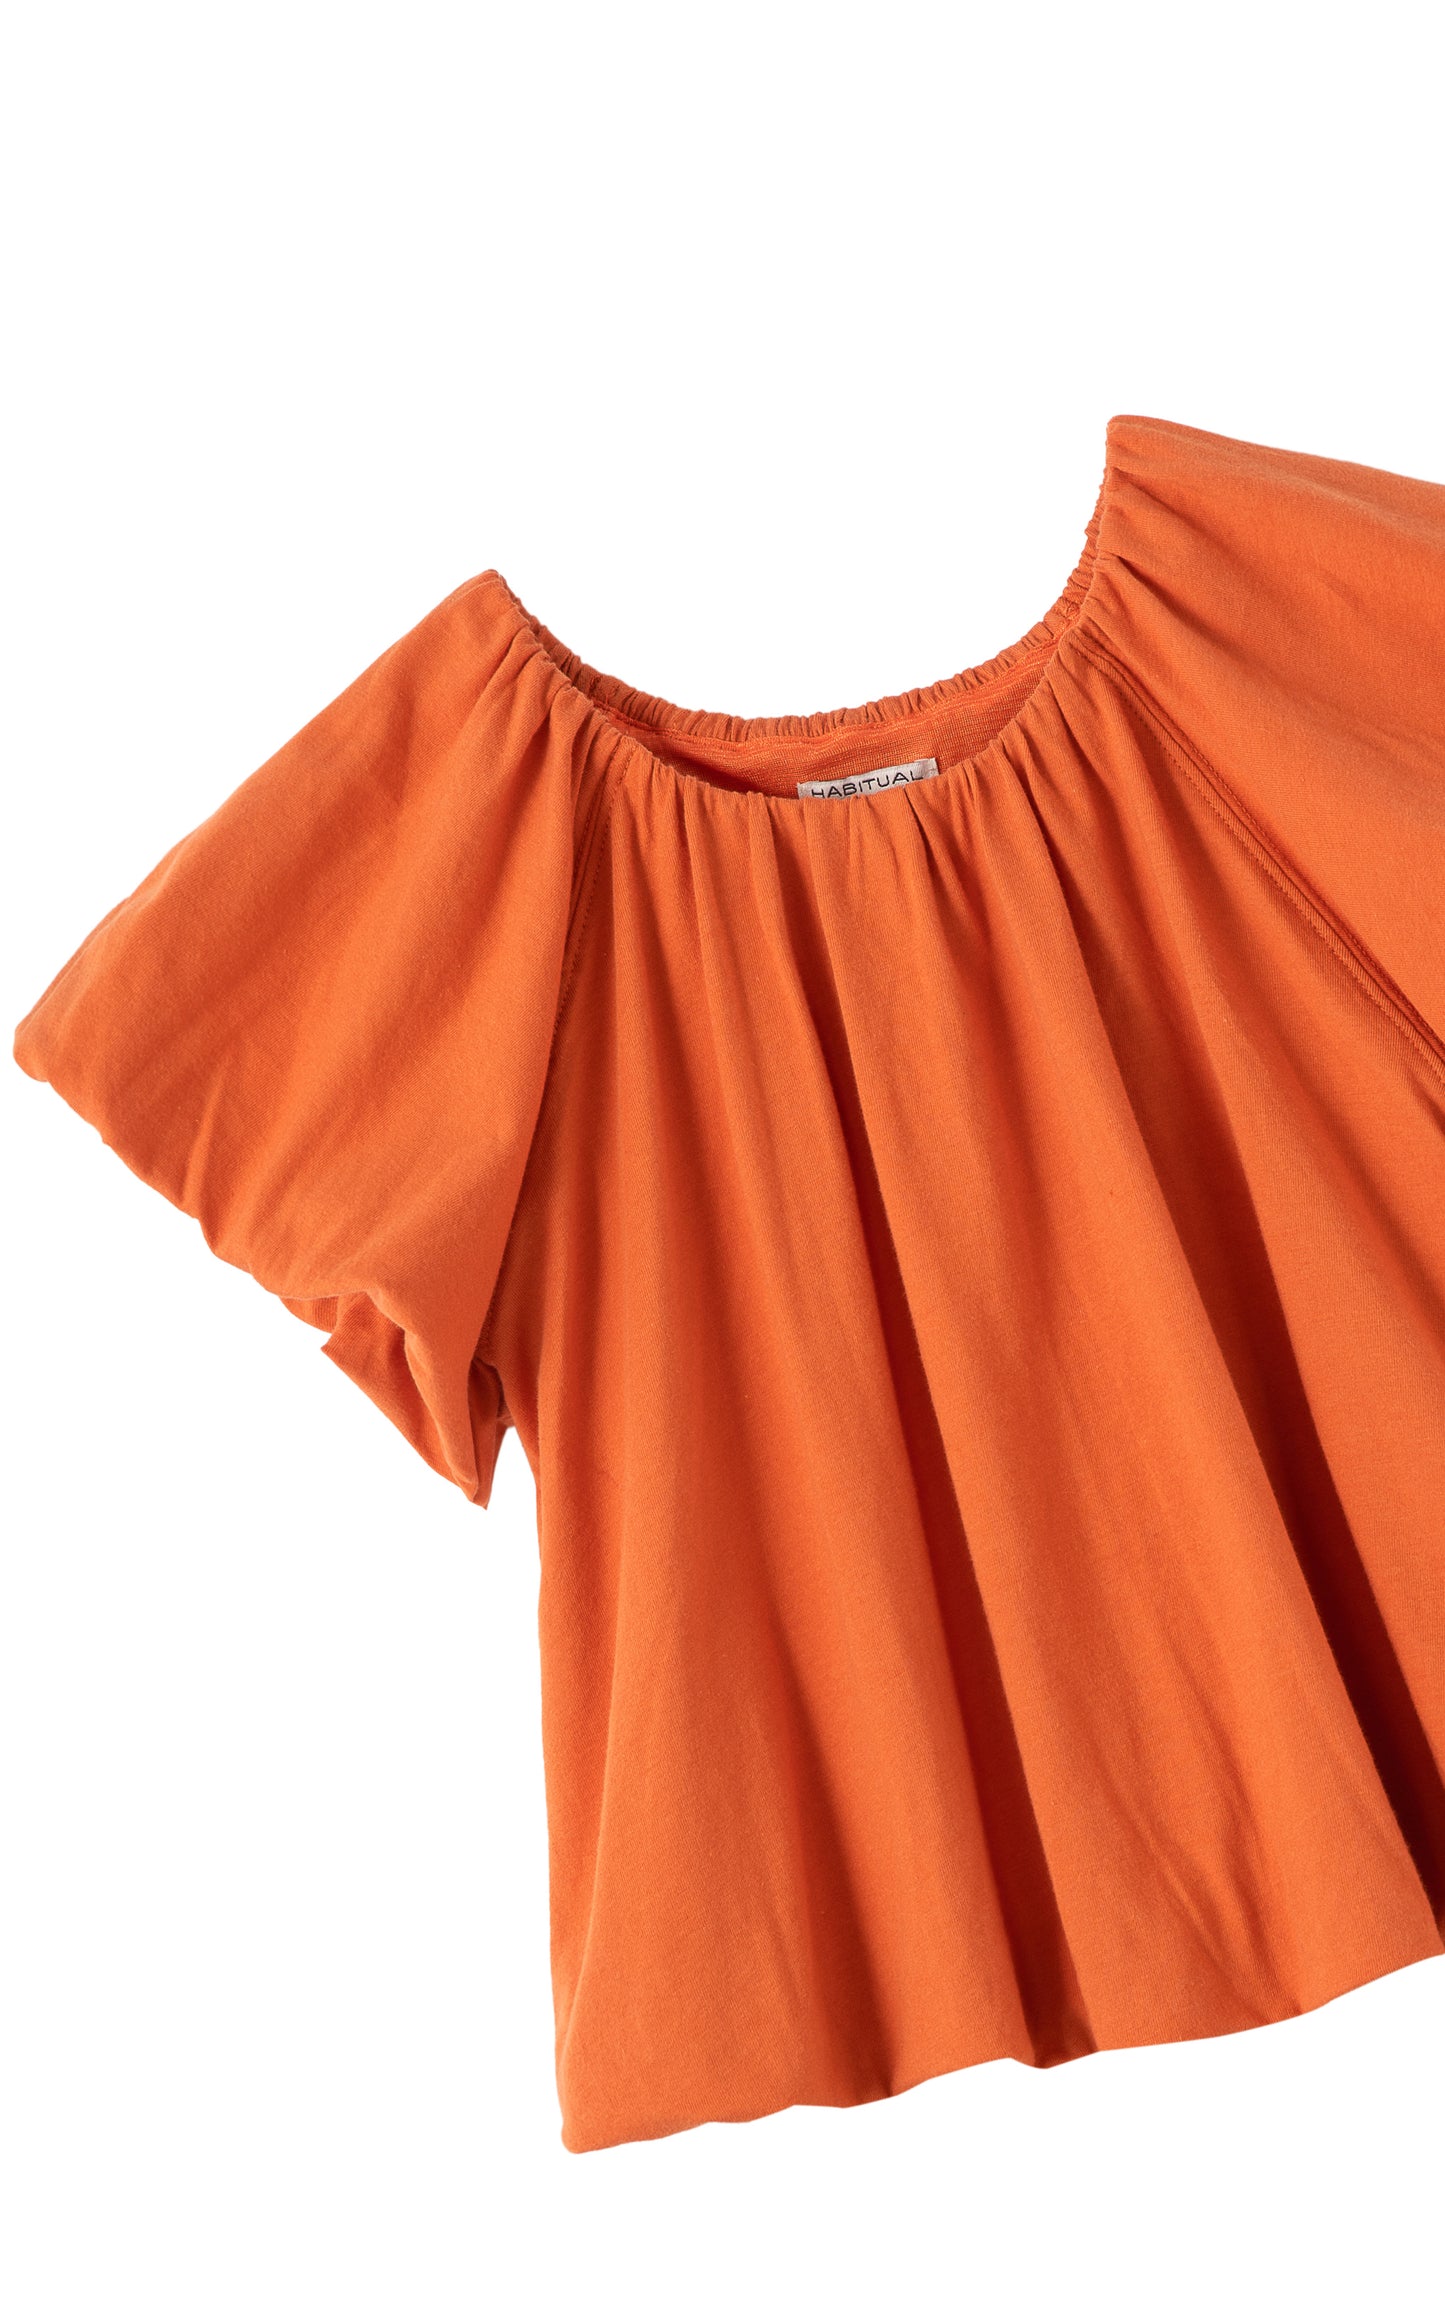 Close up view of an orange off the shoulder top